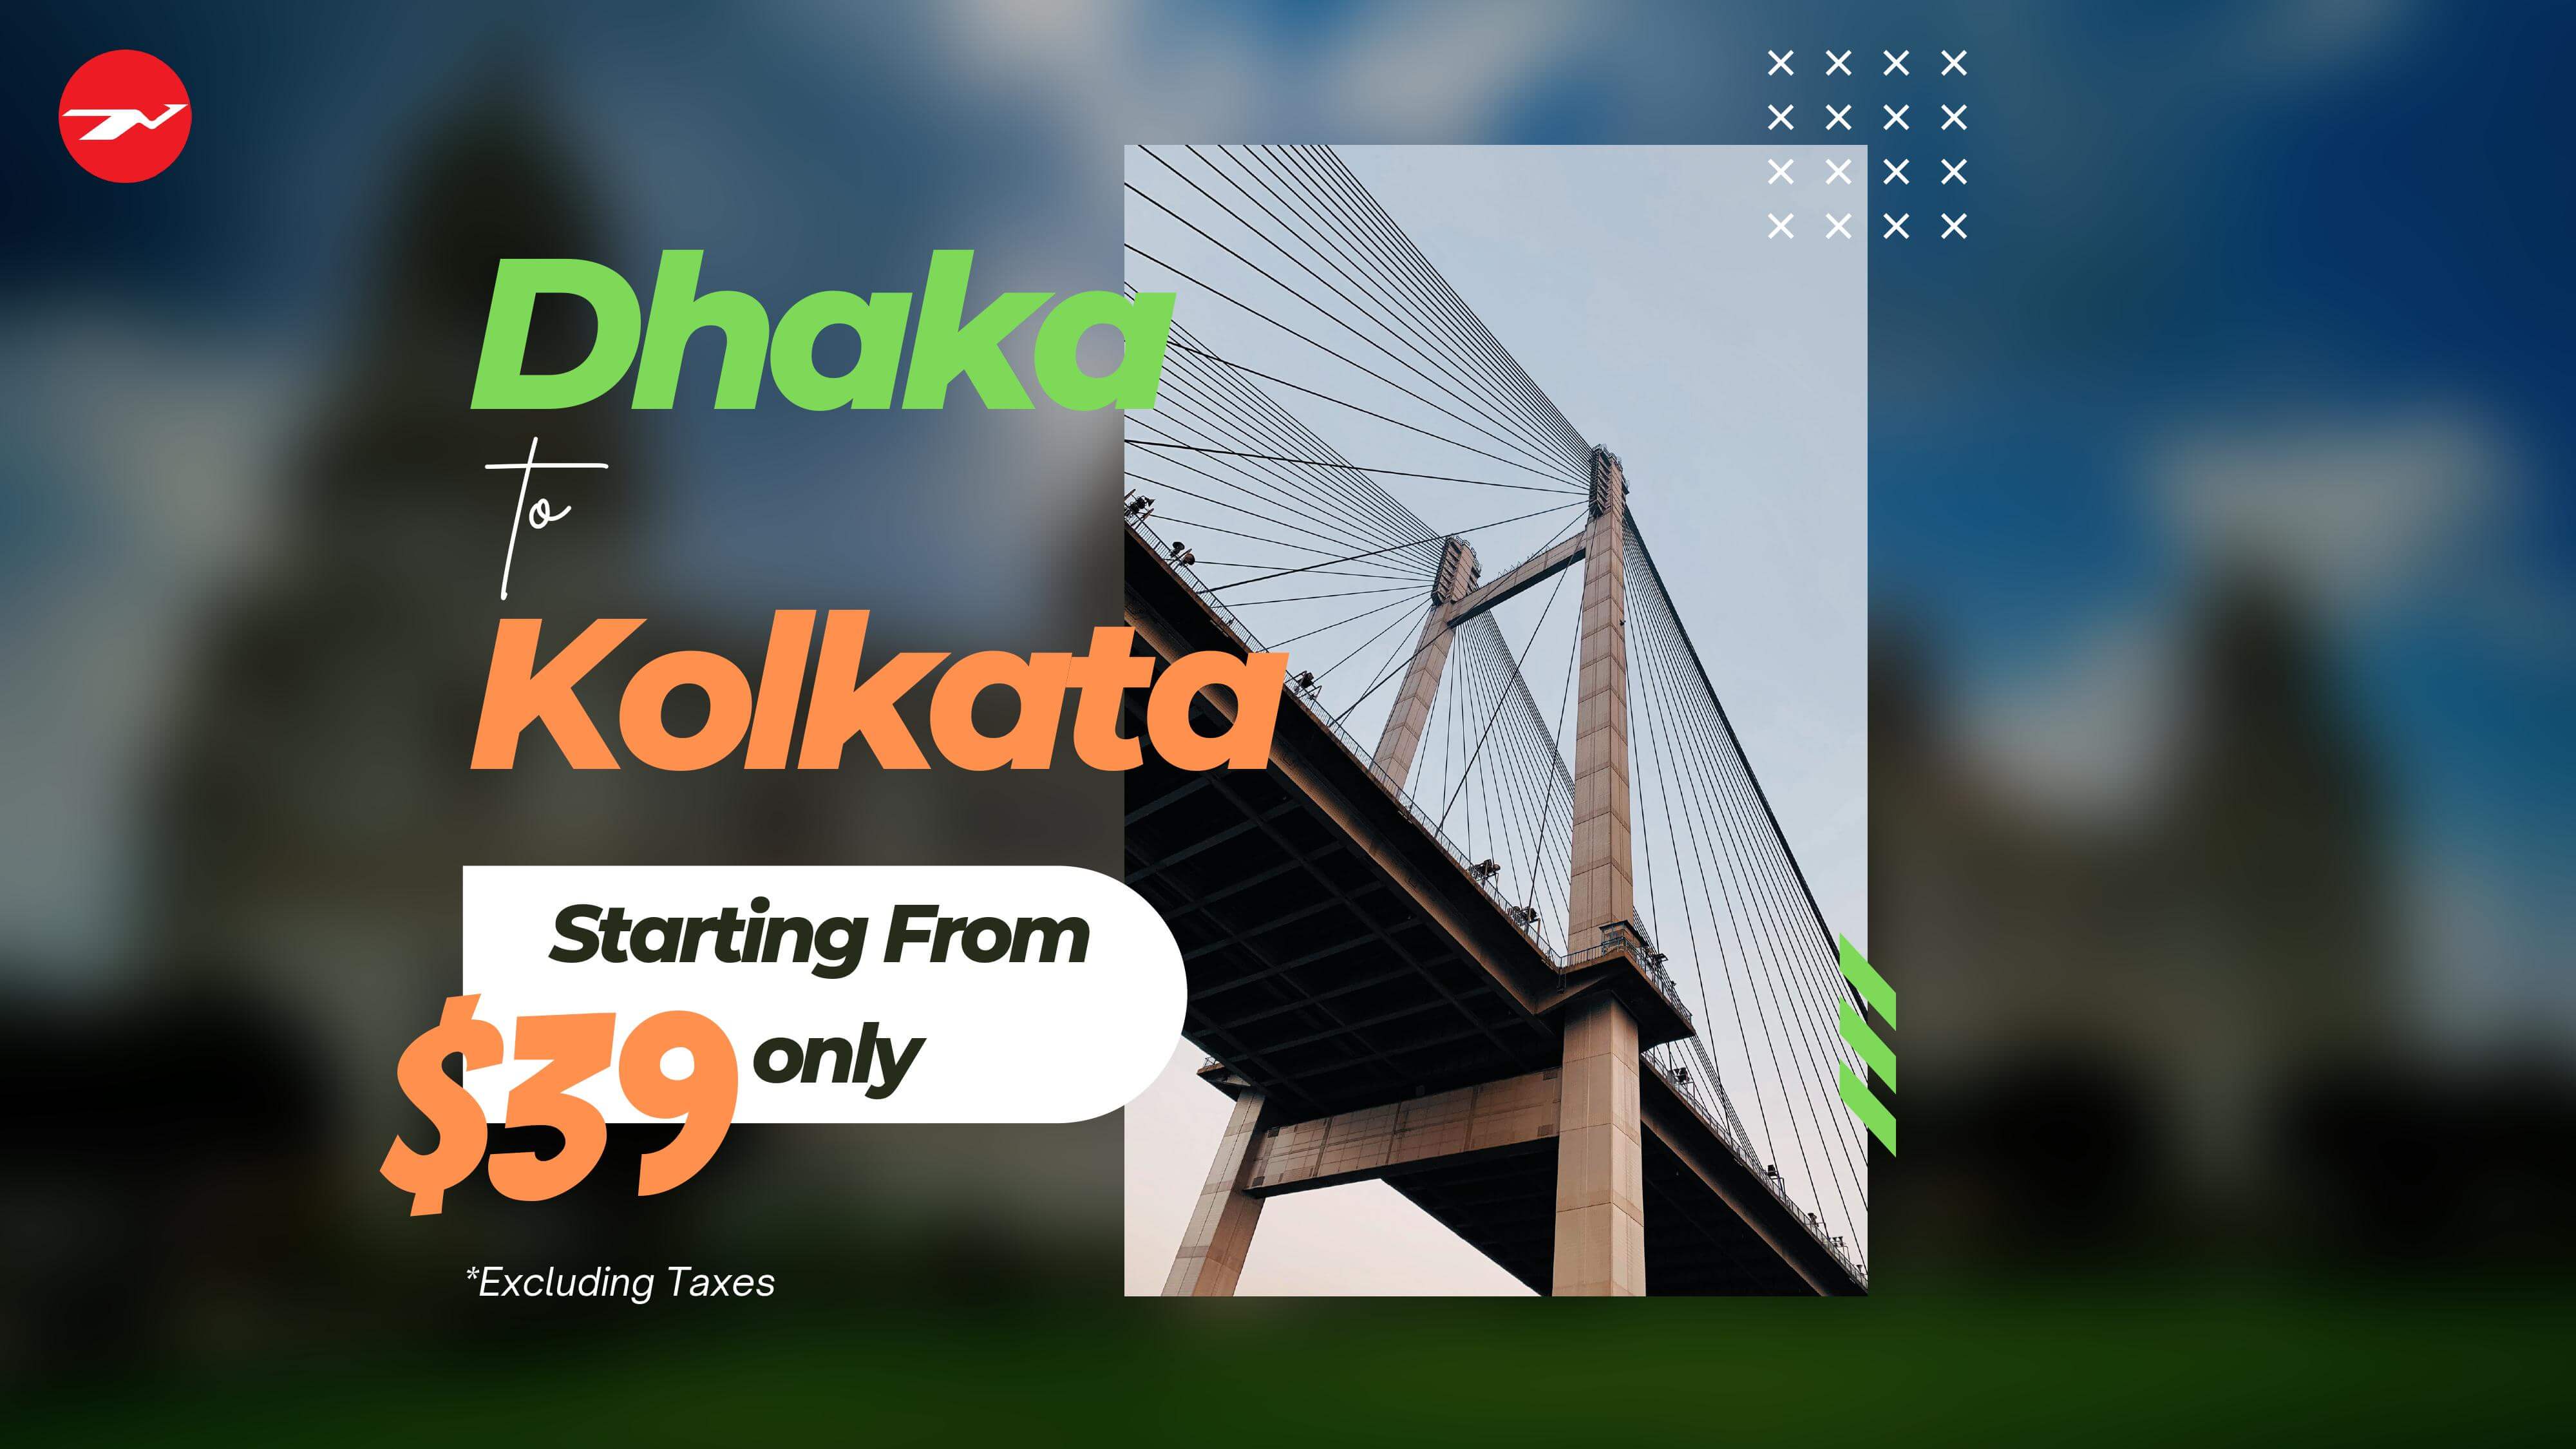 Dhaka Kolkata fare starts from $39 only (Excluding taxes)